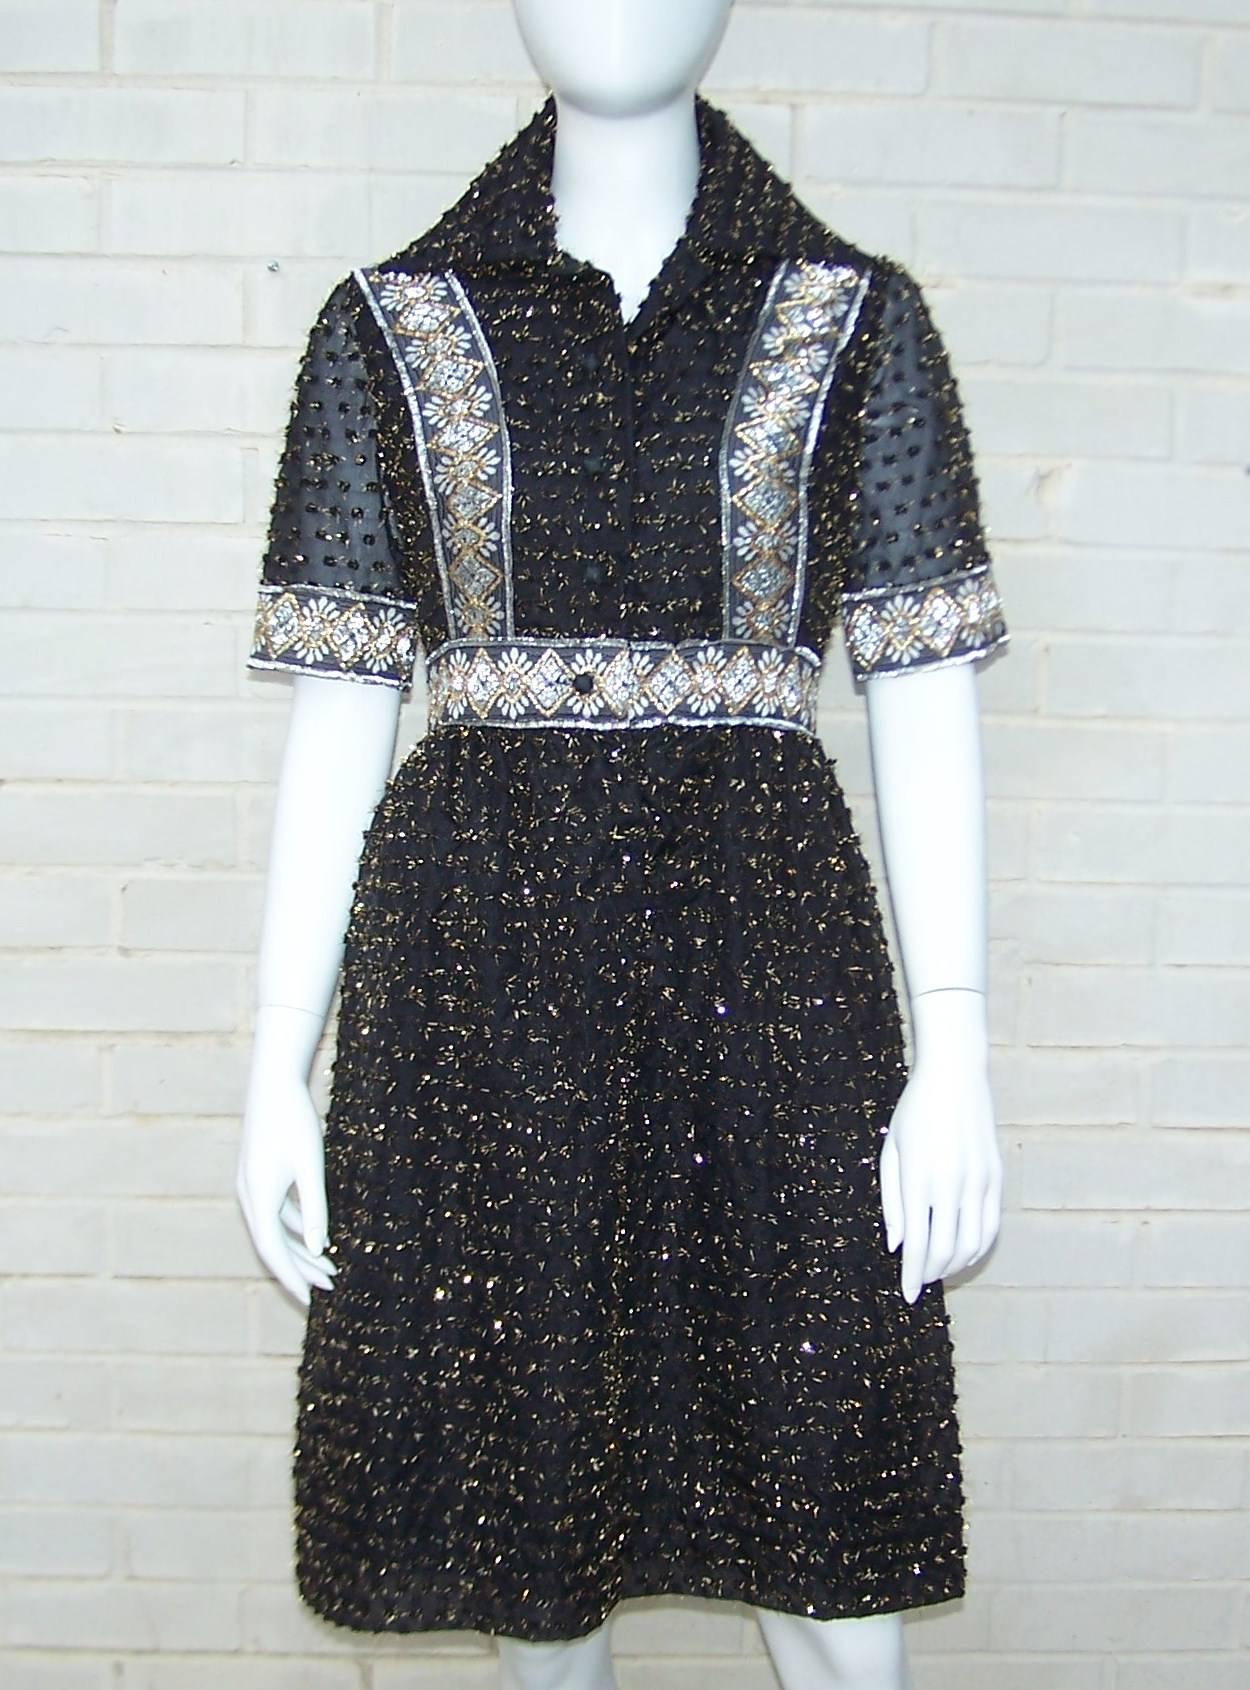 Love the details on this seemingly simple Oscar de la Renta shirt dress.  The paper weight sheer fabric is covered with textural pom poms sprouting gold threads.  The bodice and cuffs are outlined in silver and gold metallic braiding which creates a